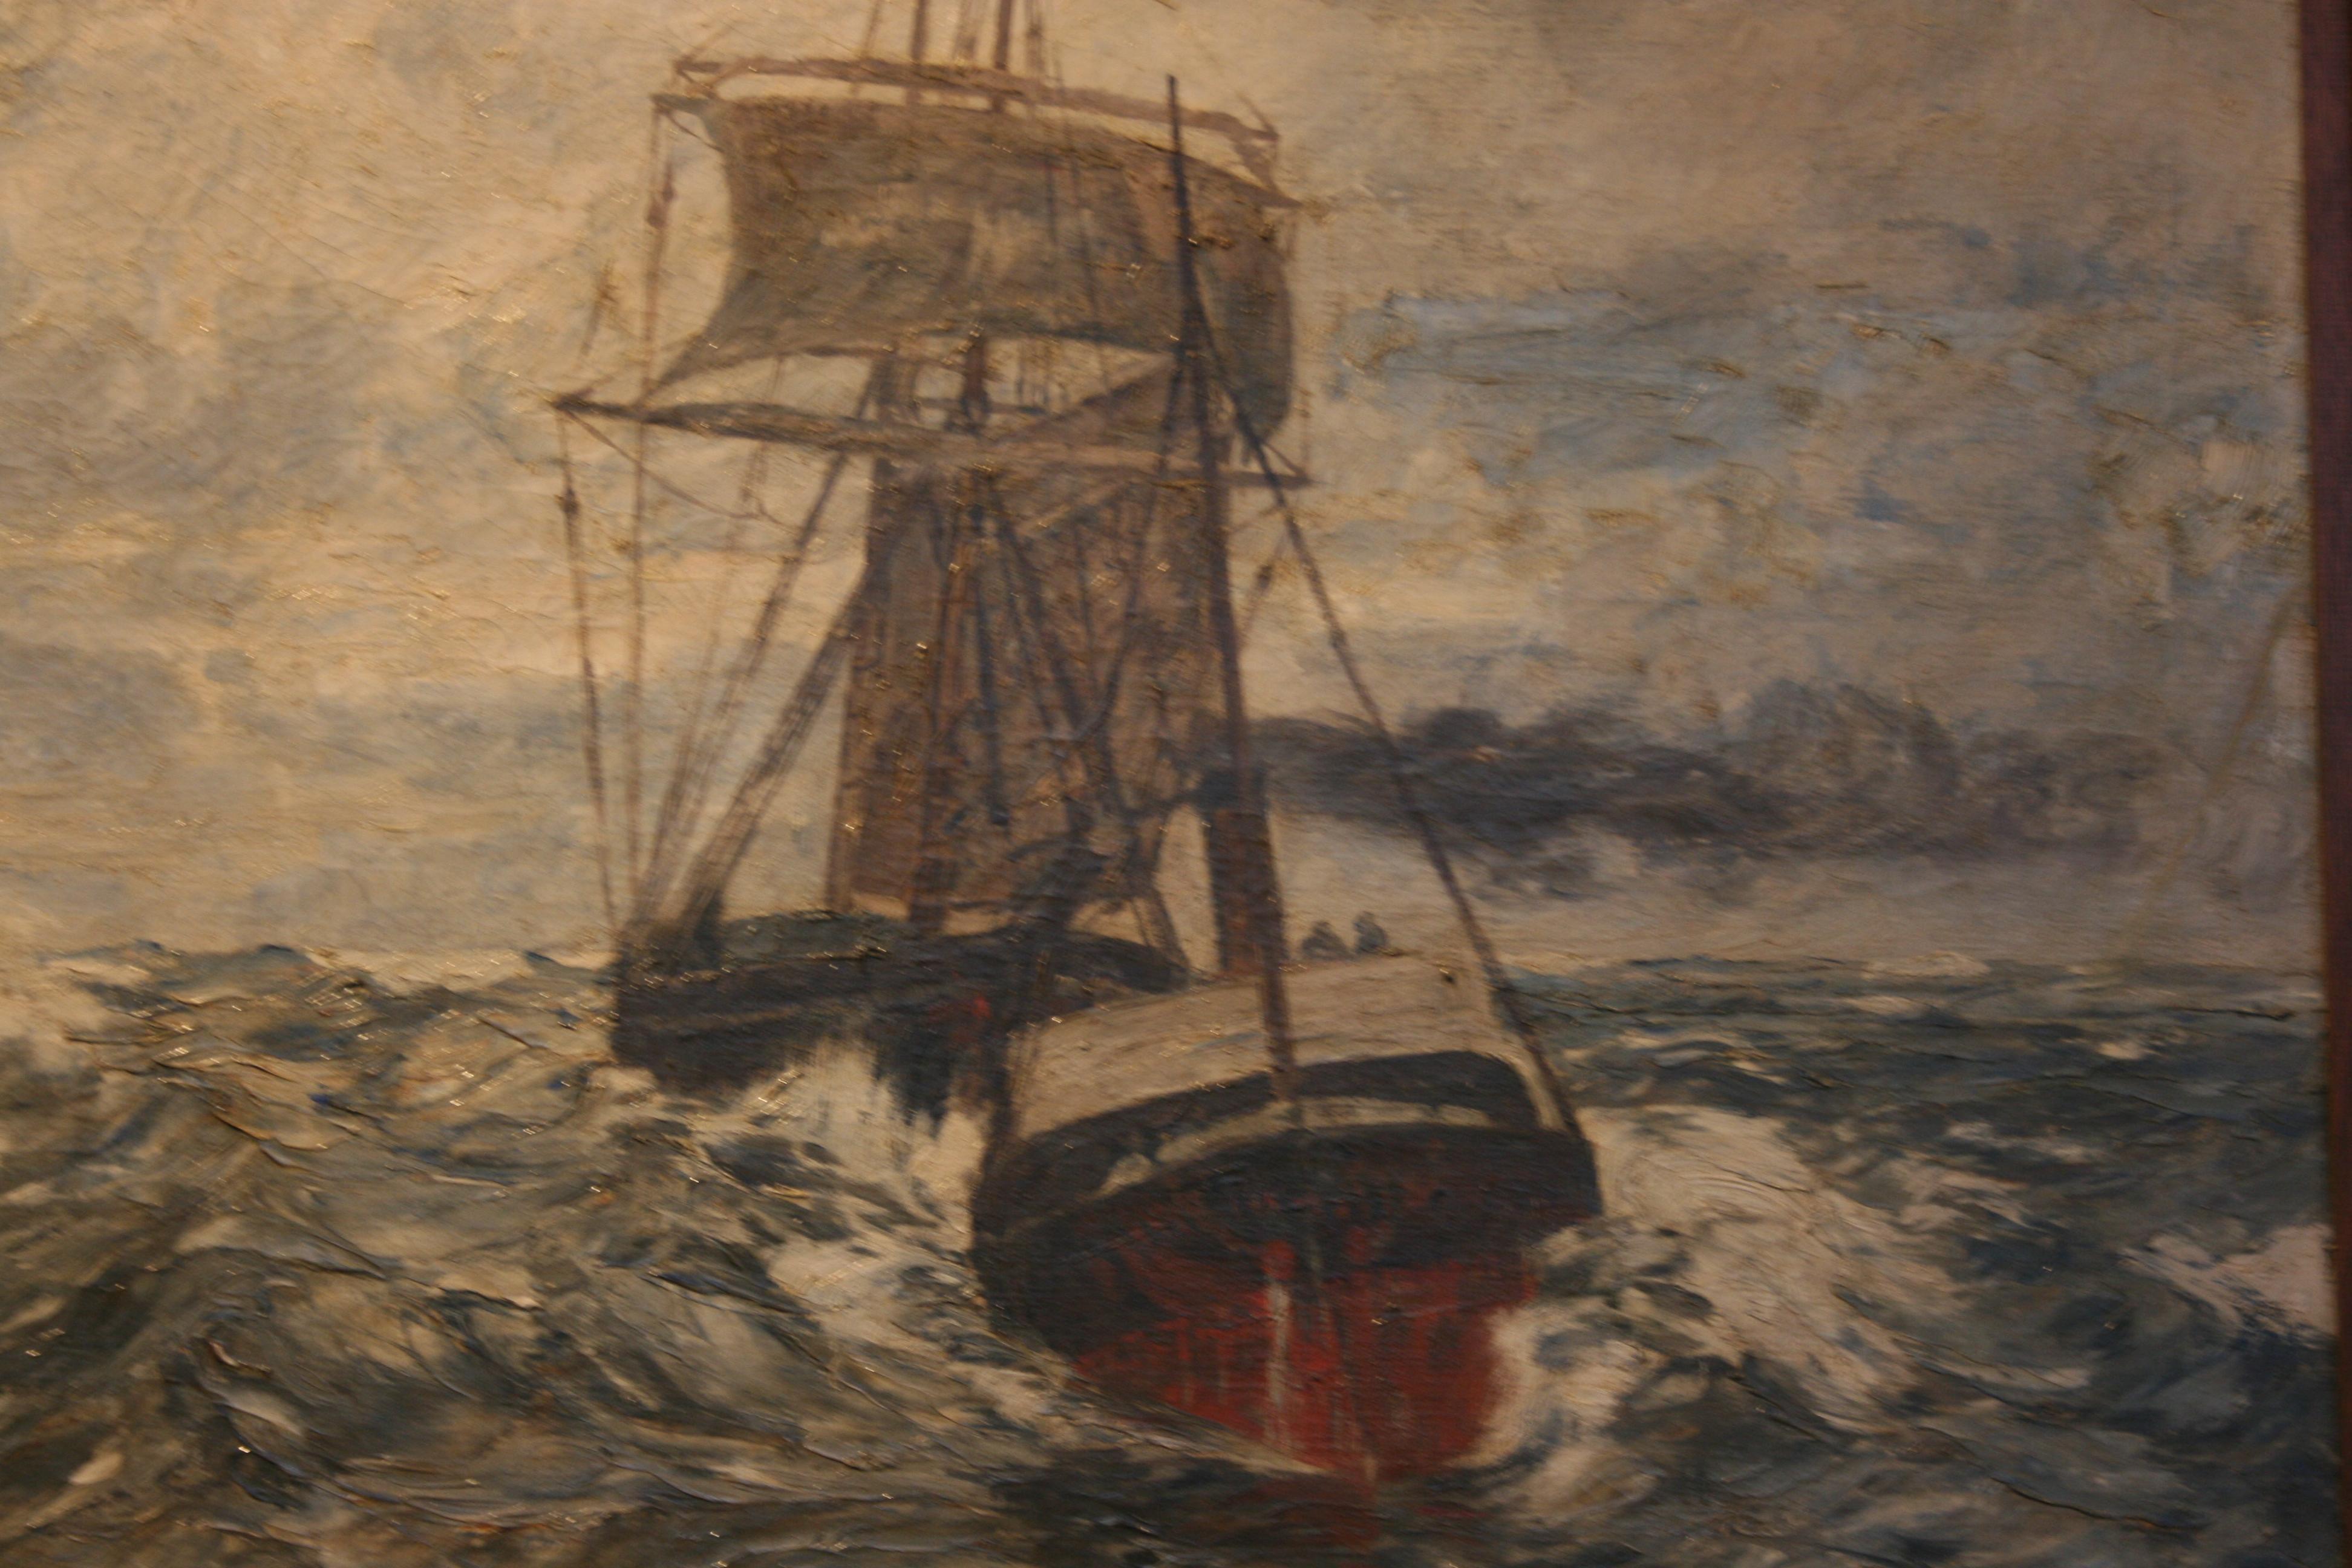 Painting Oil on Canvas, Fishing Boats On The High Seas, by Andreas Dirks 1